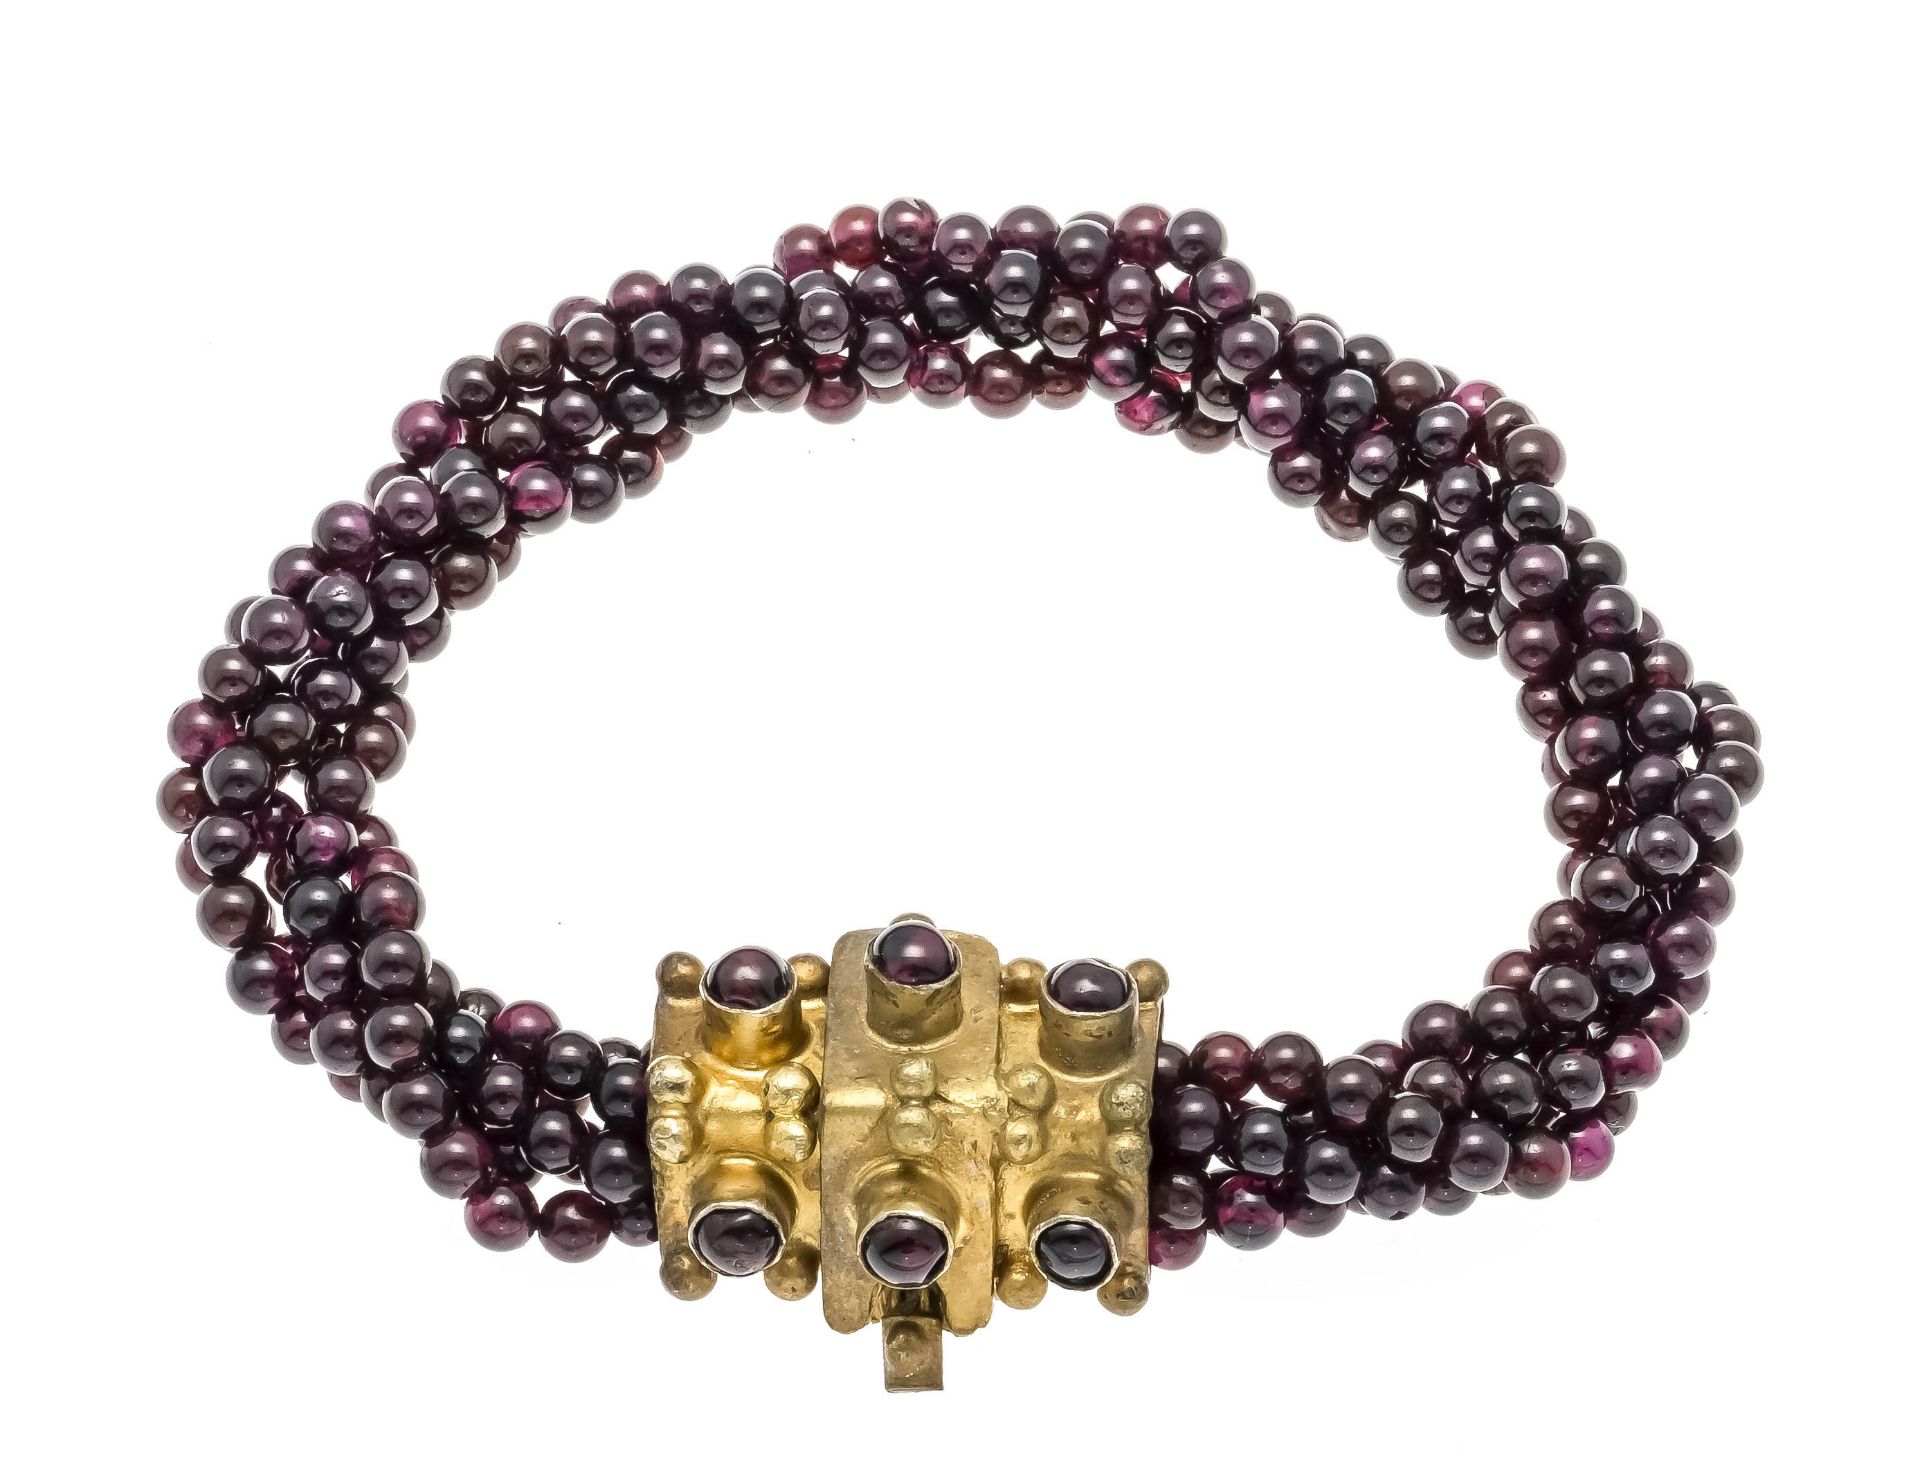 Modern garnet bracelet with clasp silver 925/000 gold-plated, set with 6 round garnet cabochons 4